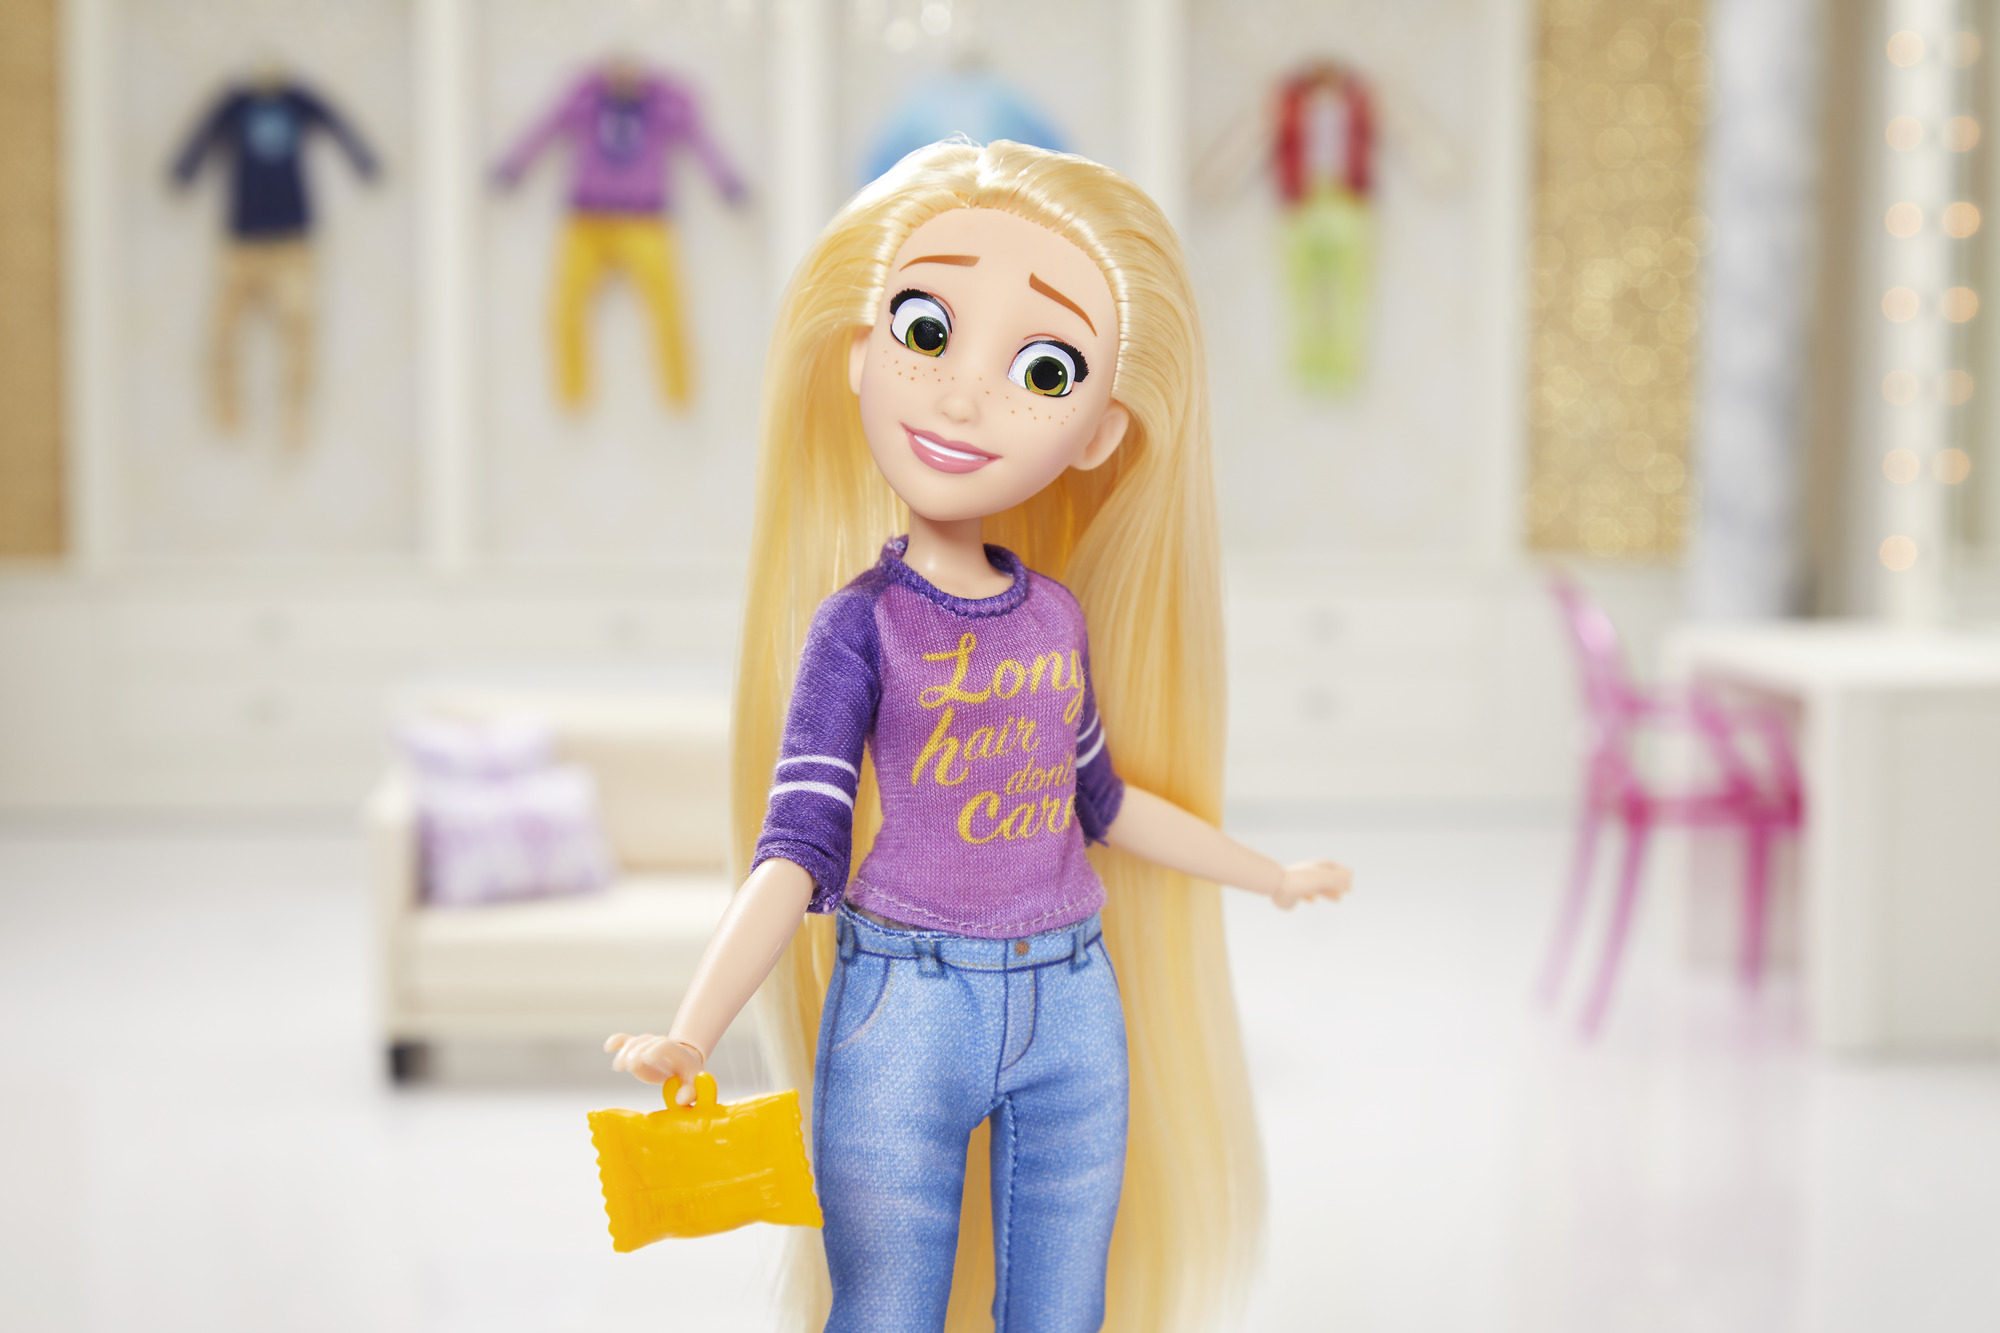 Disney Princess Comfy Squad Rapunzel, Inspired by Ralph Breaks the Internet Movie - image 4 of 7